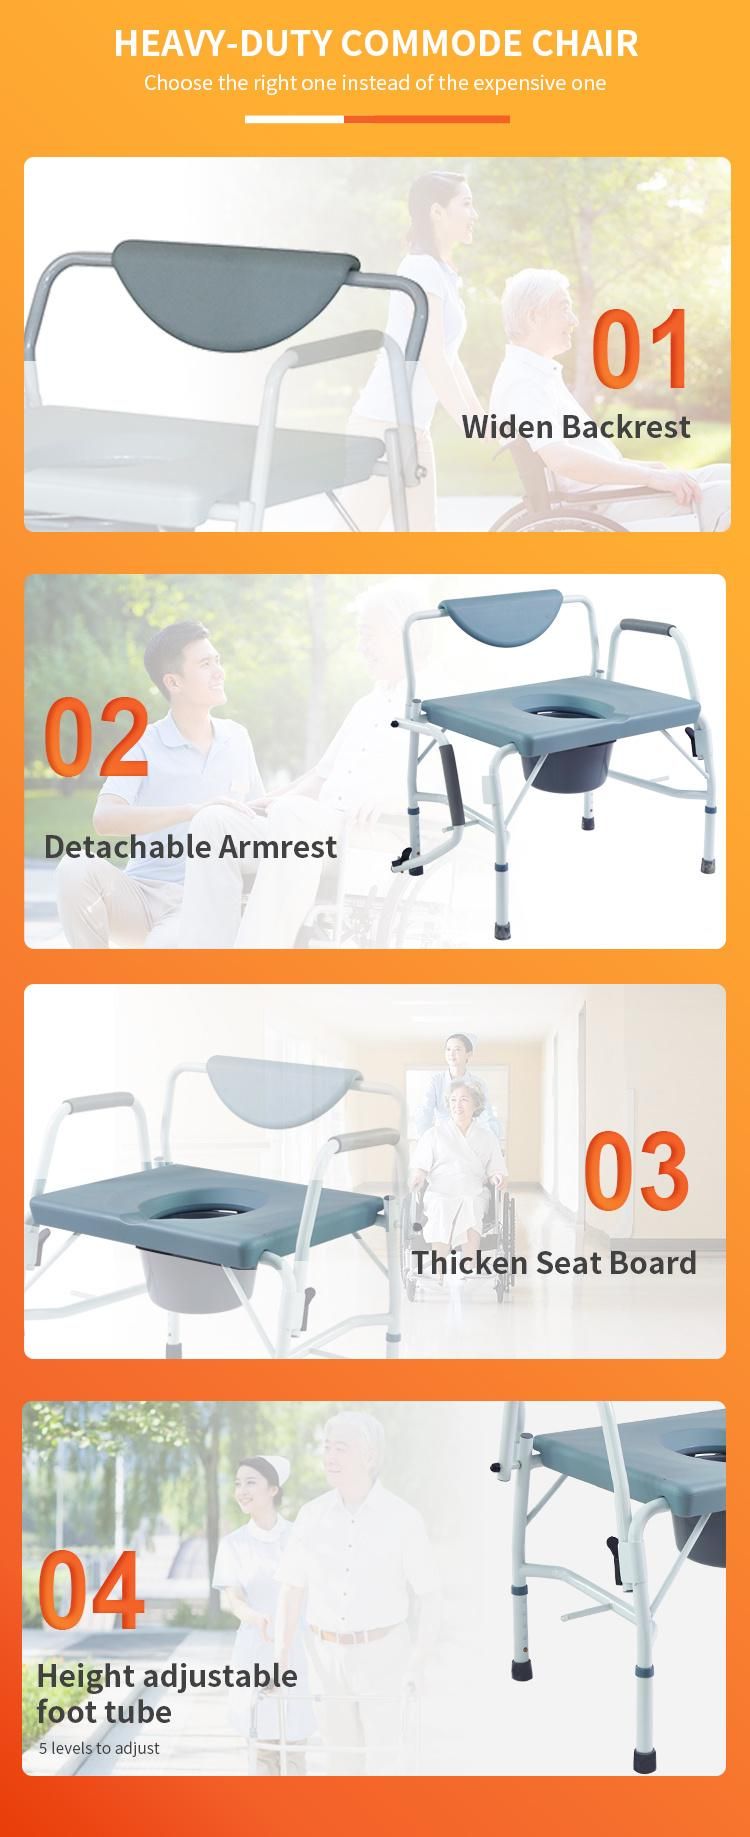 Big Commode Chair Bedroom Big Seat Width Height Adjust Heavy-Duty Medical Steel Commode Chair with Bucket Steel for Obese Patients